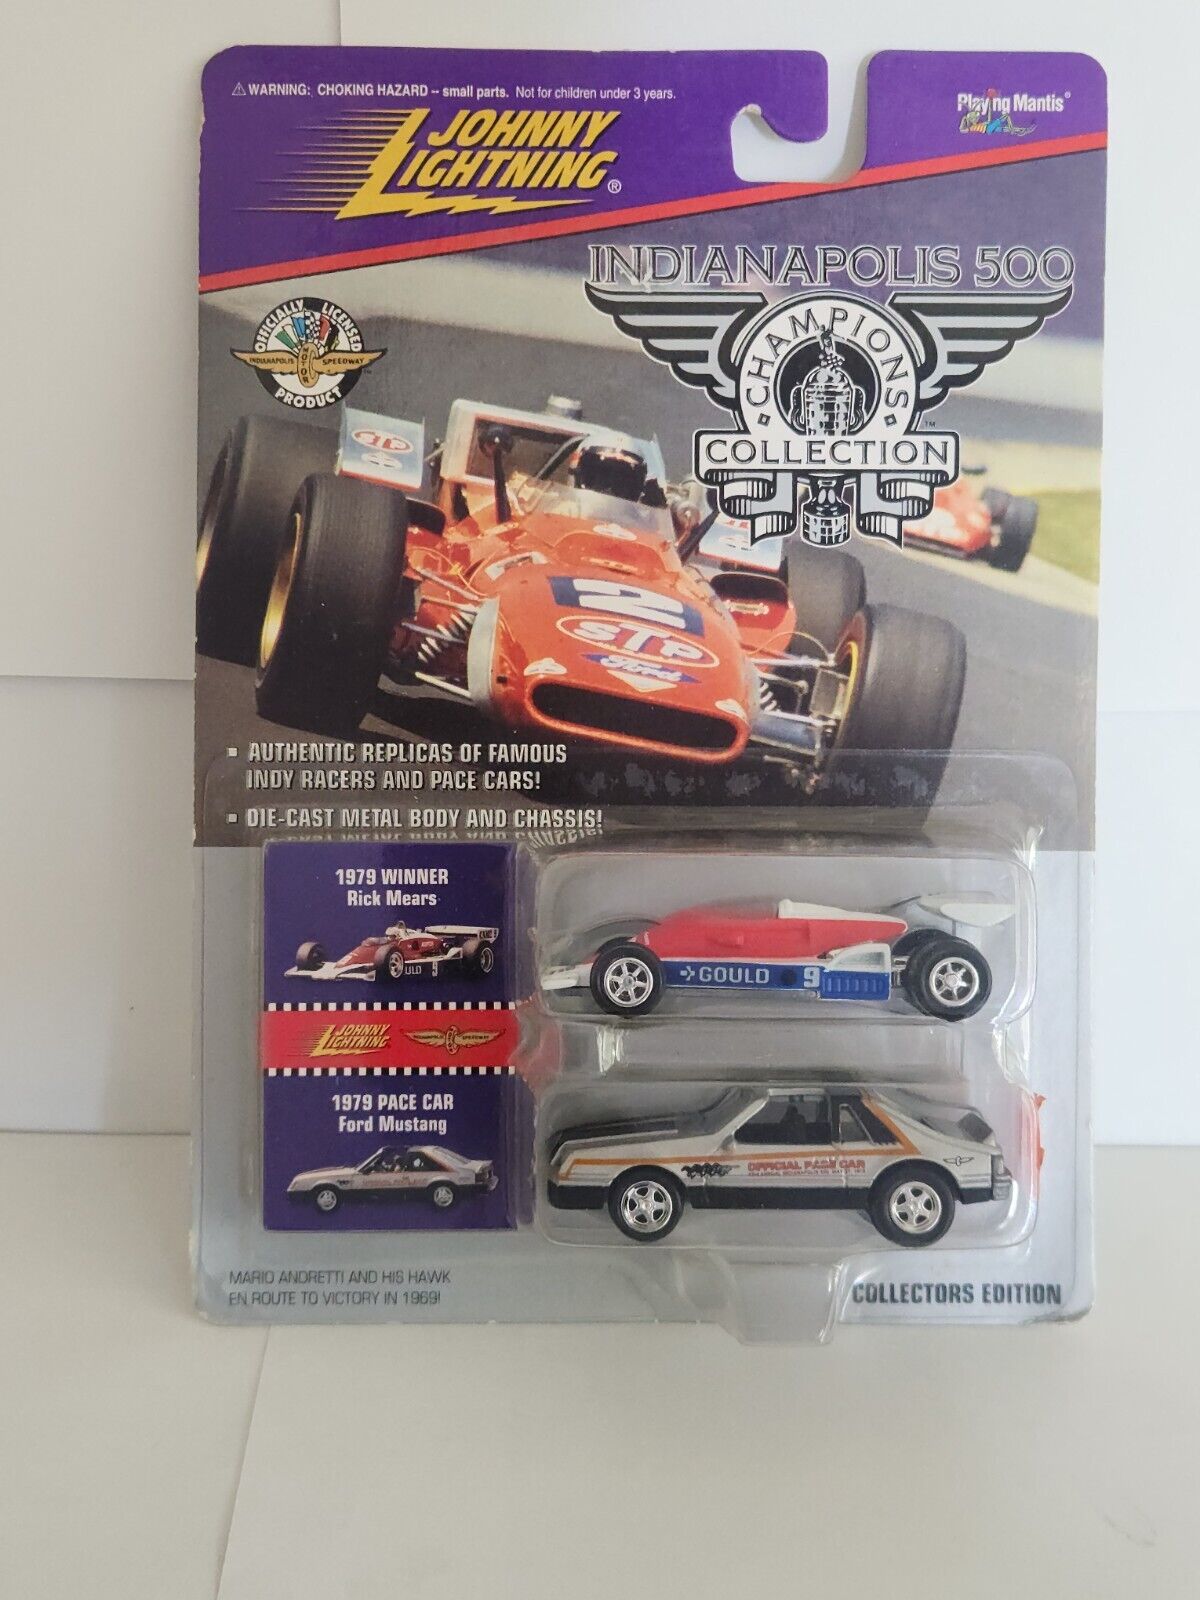 Johnny Lightning Indianapolis 500 1979 Gewinner Rick Mear Tempo Auto Ford L26